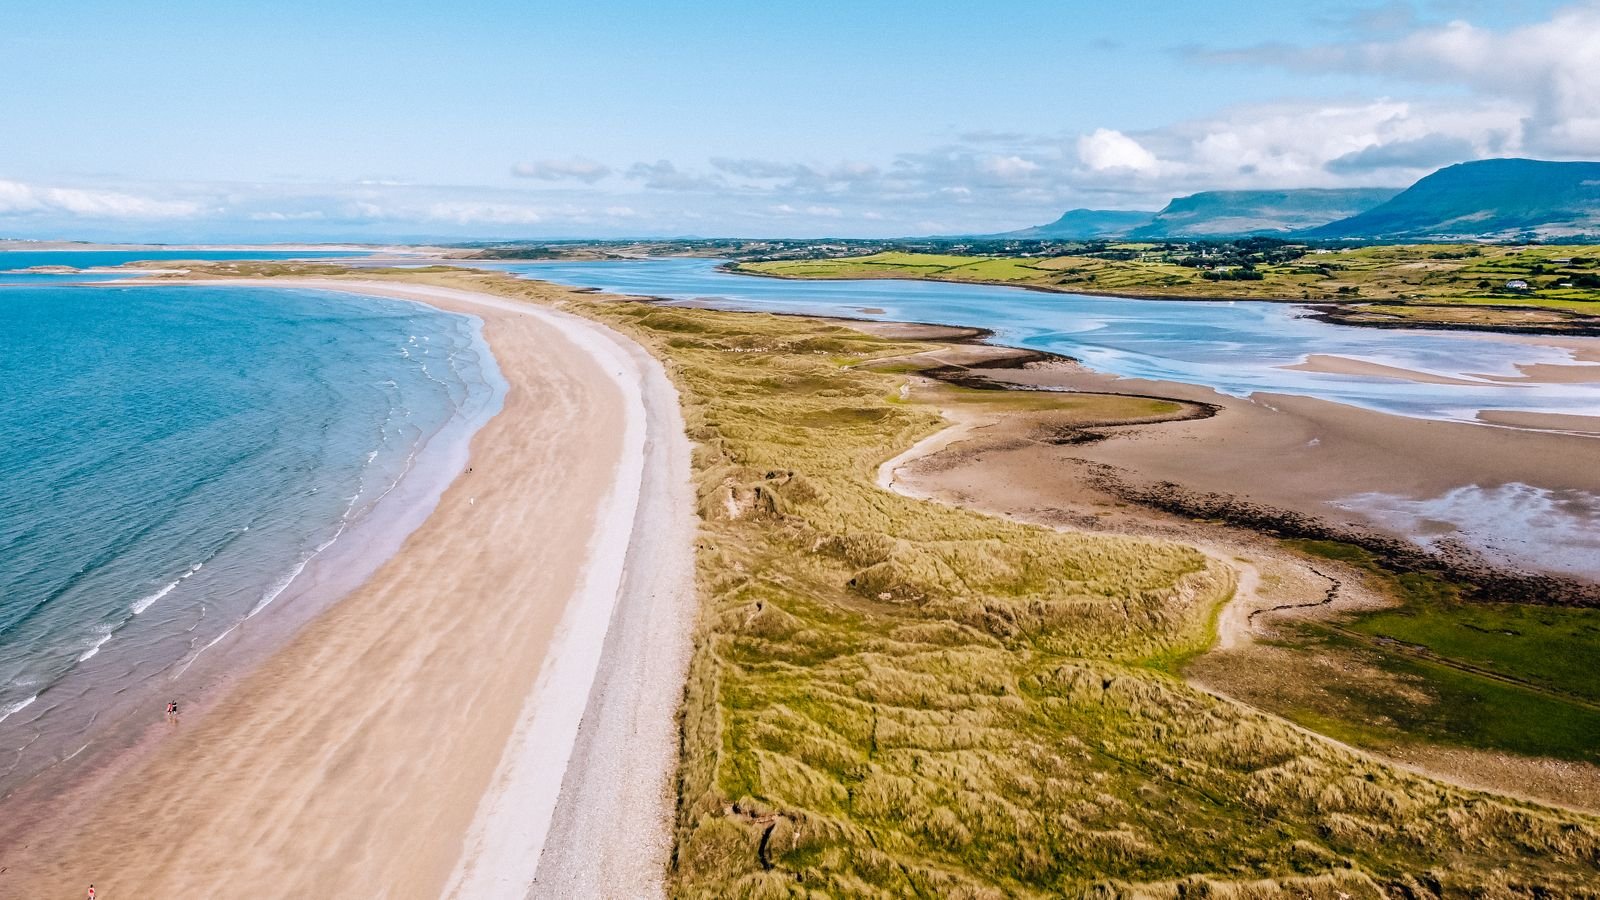 drone photo above a long stretch of beach with blue water and grassy sand dunes with mountains in the background